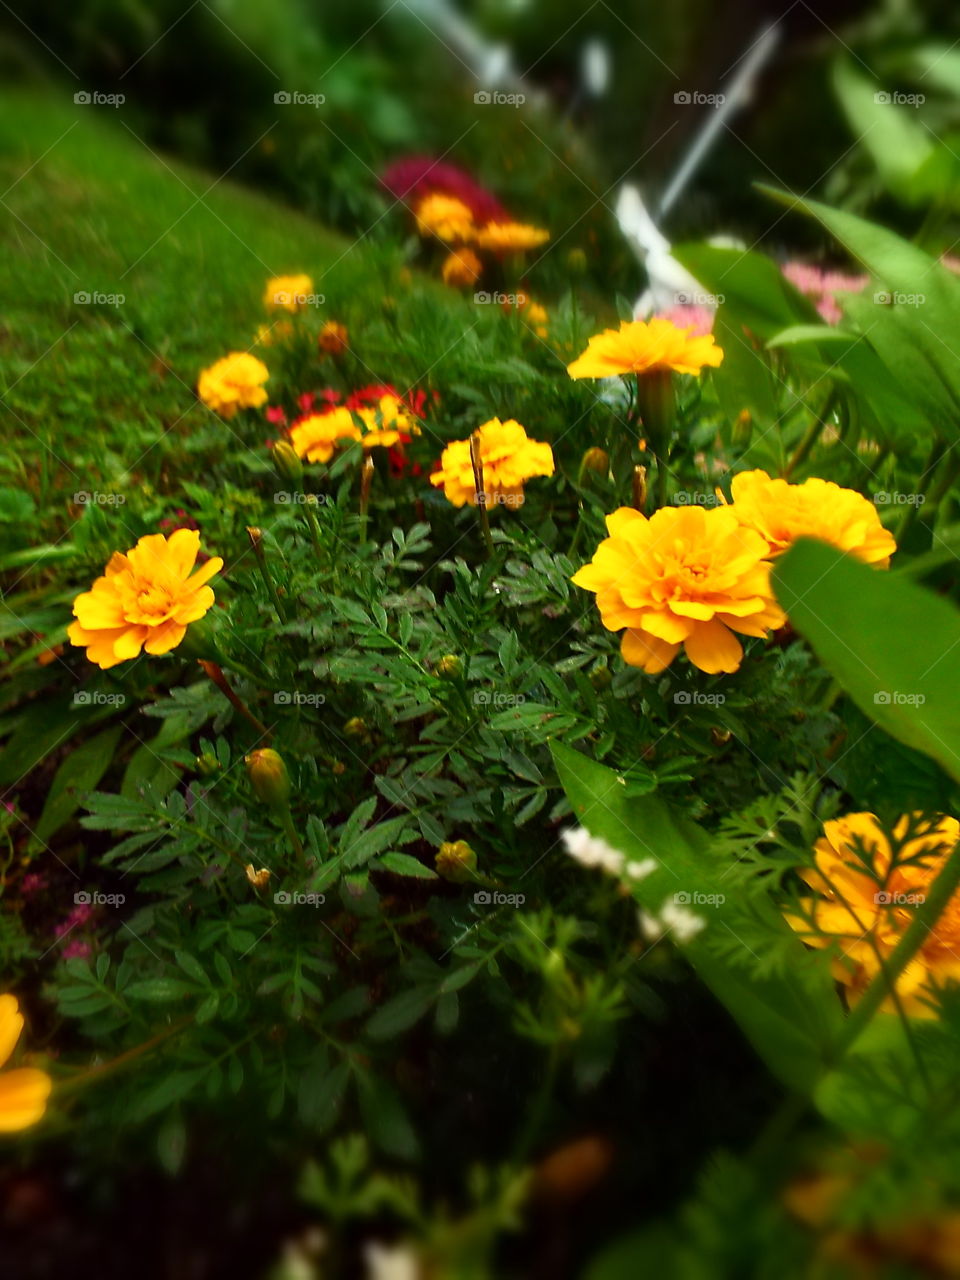 Low angle view of marigolds along edge of lawn
